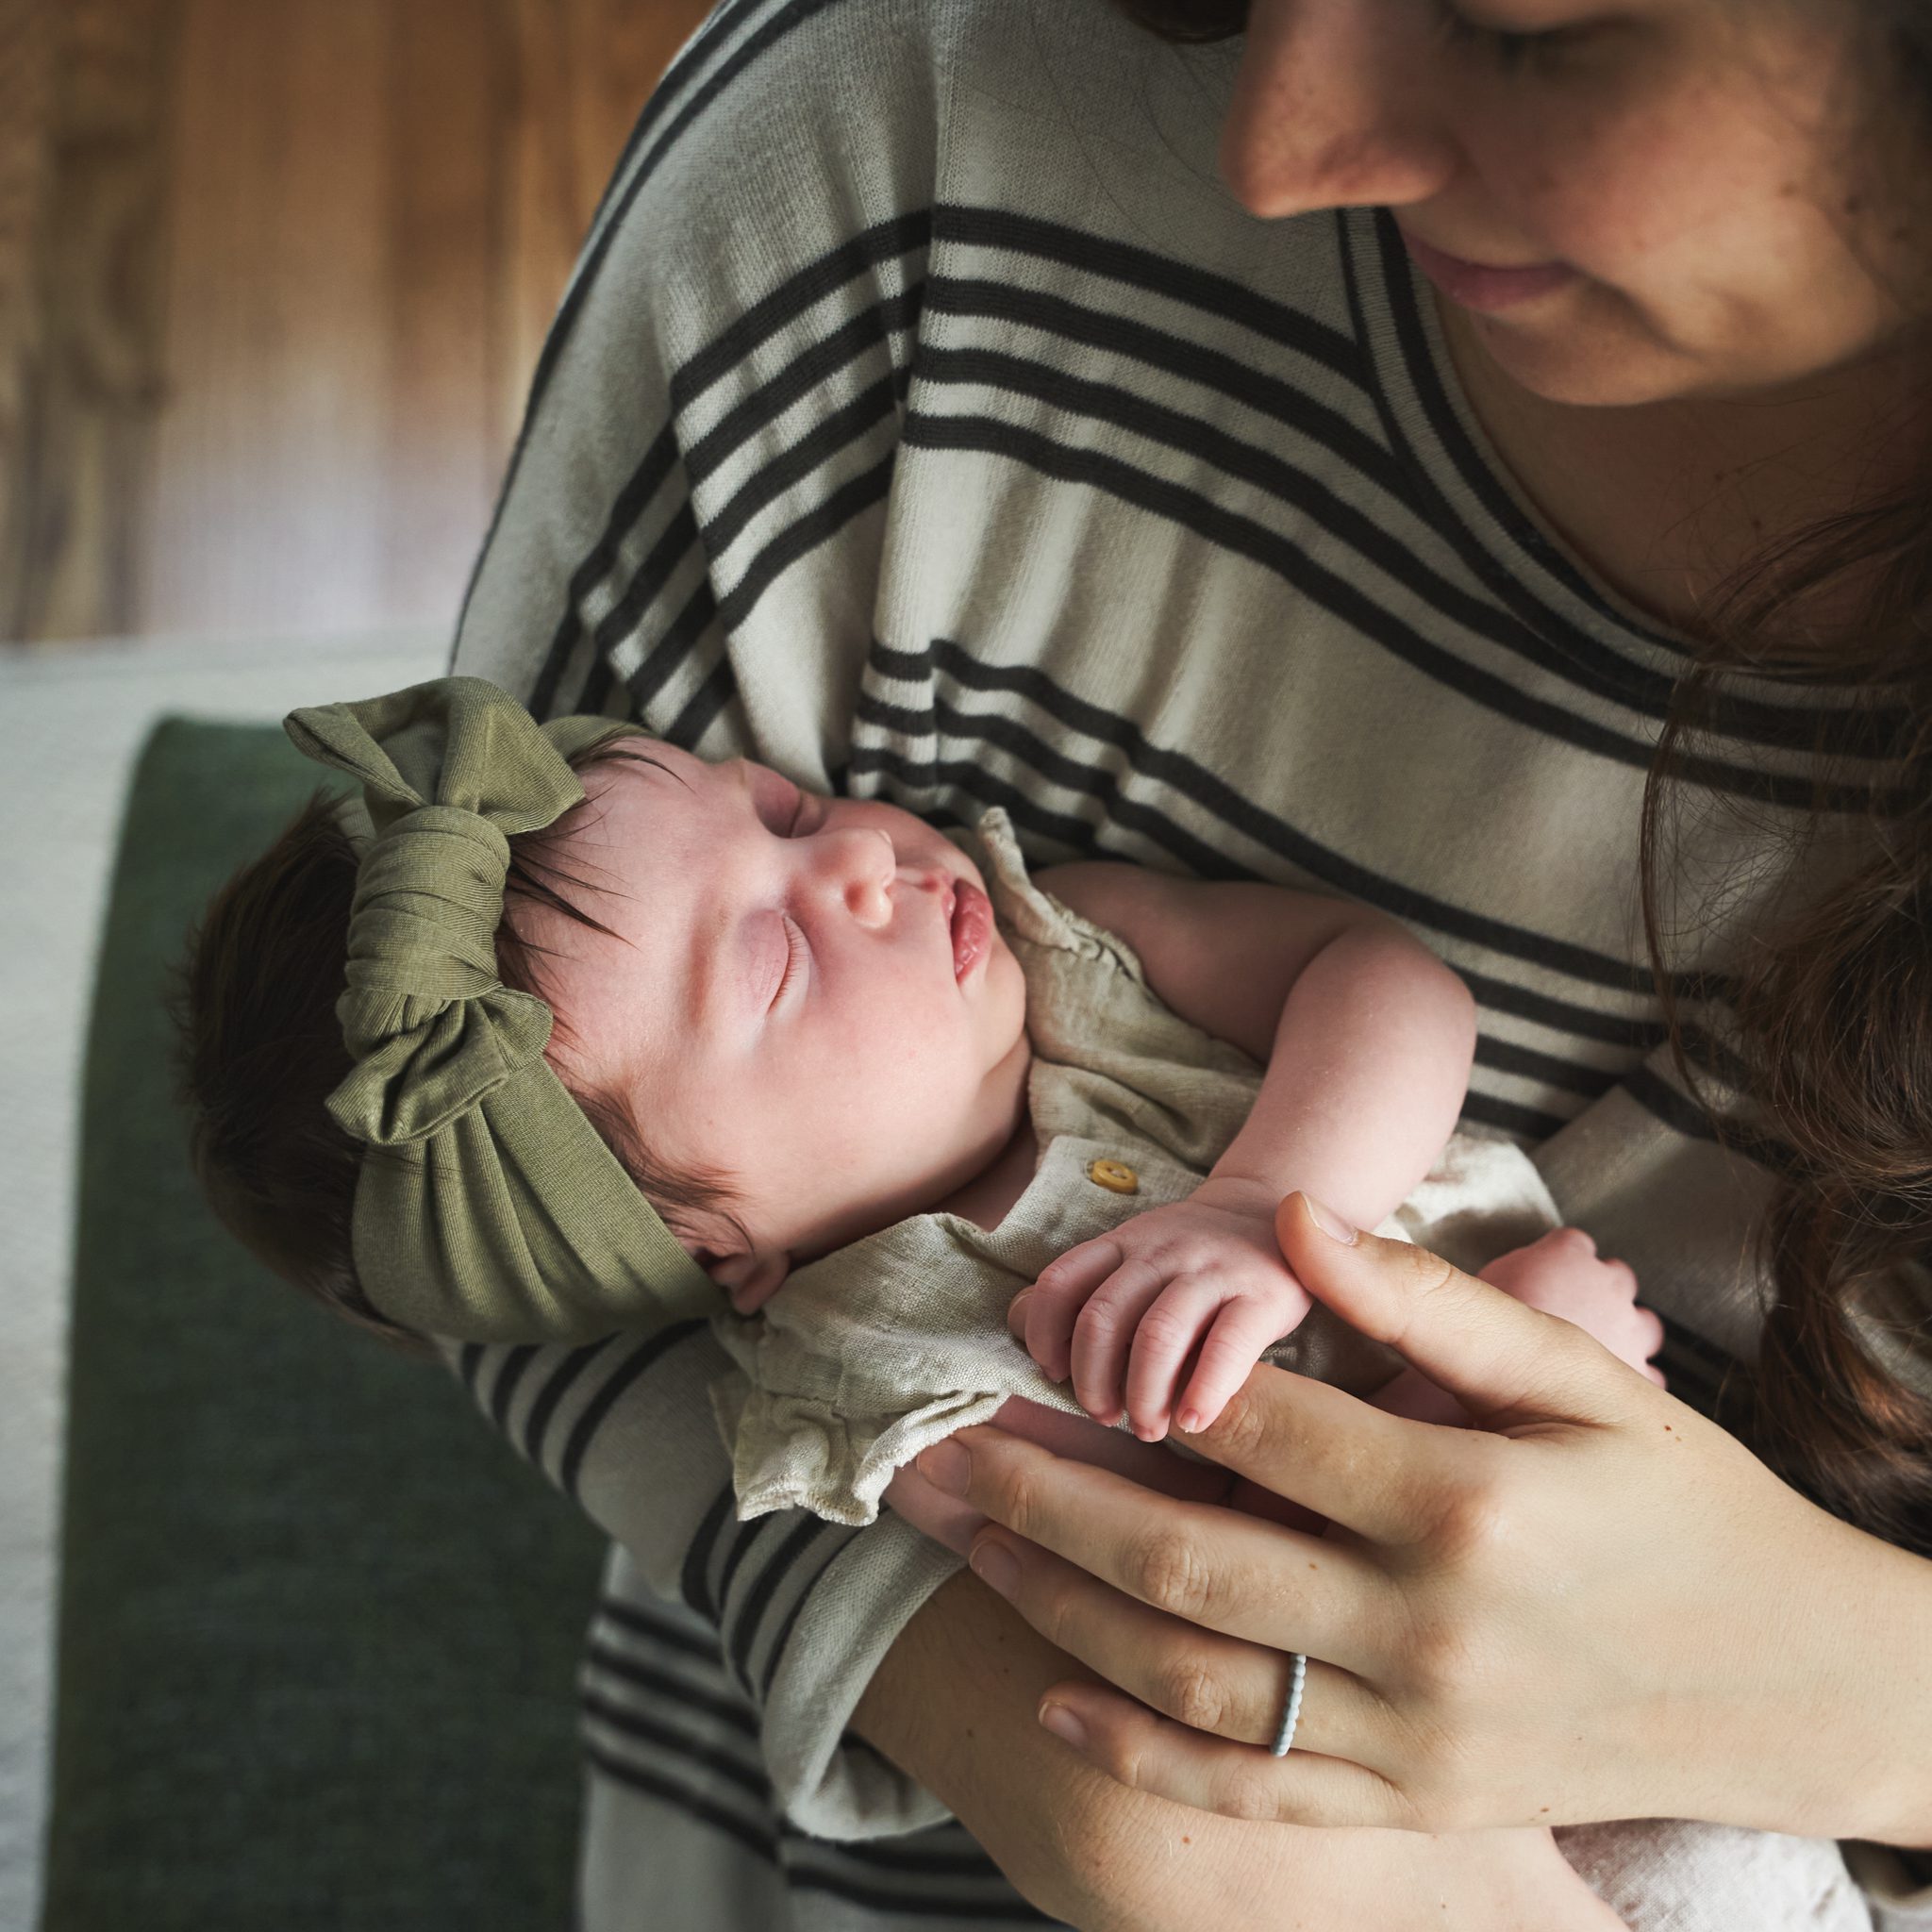 newborn baby with a green headband sleeping in moms arms in the window light